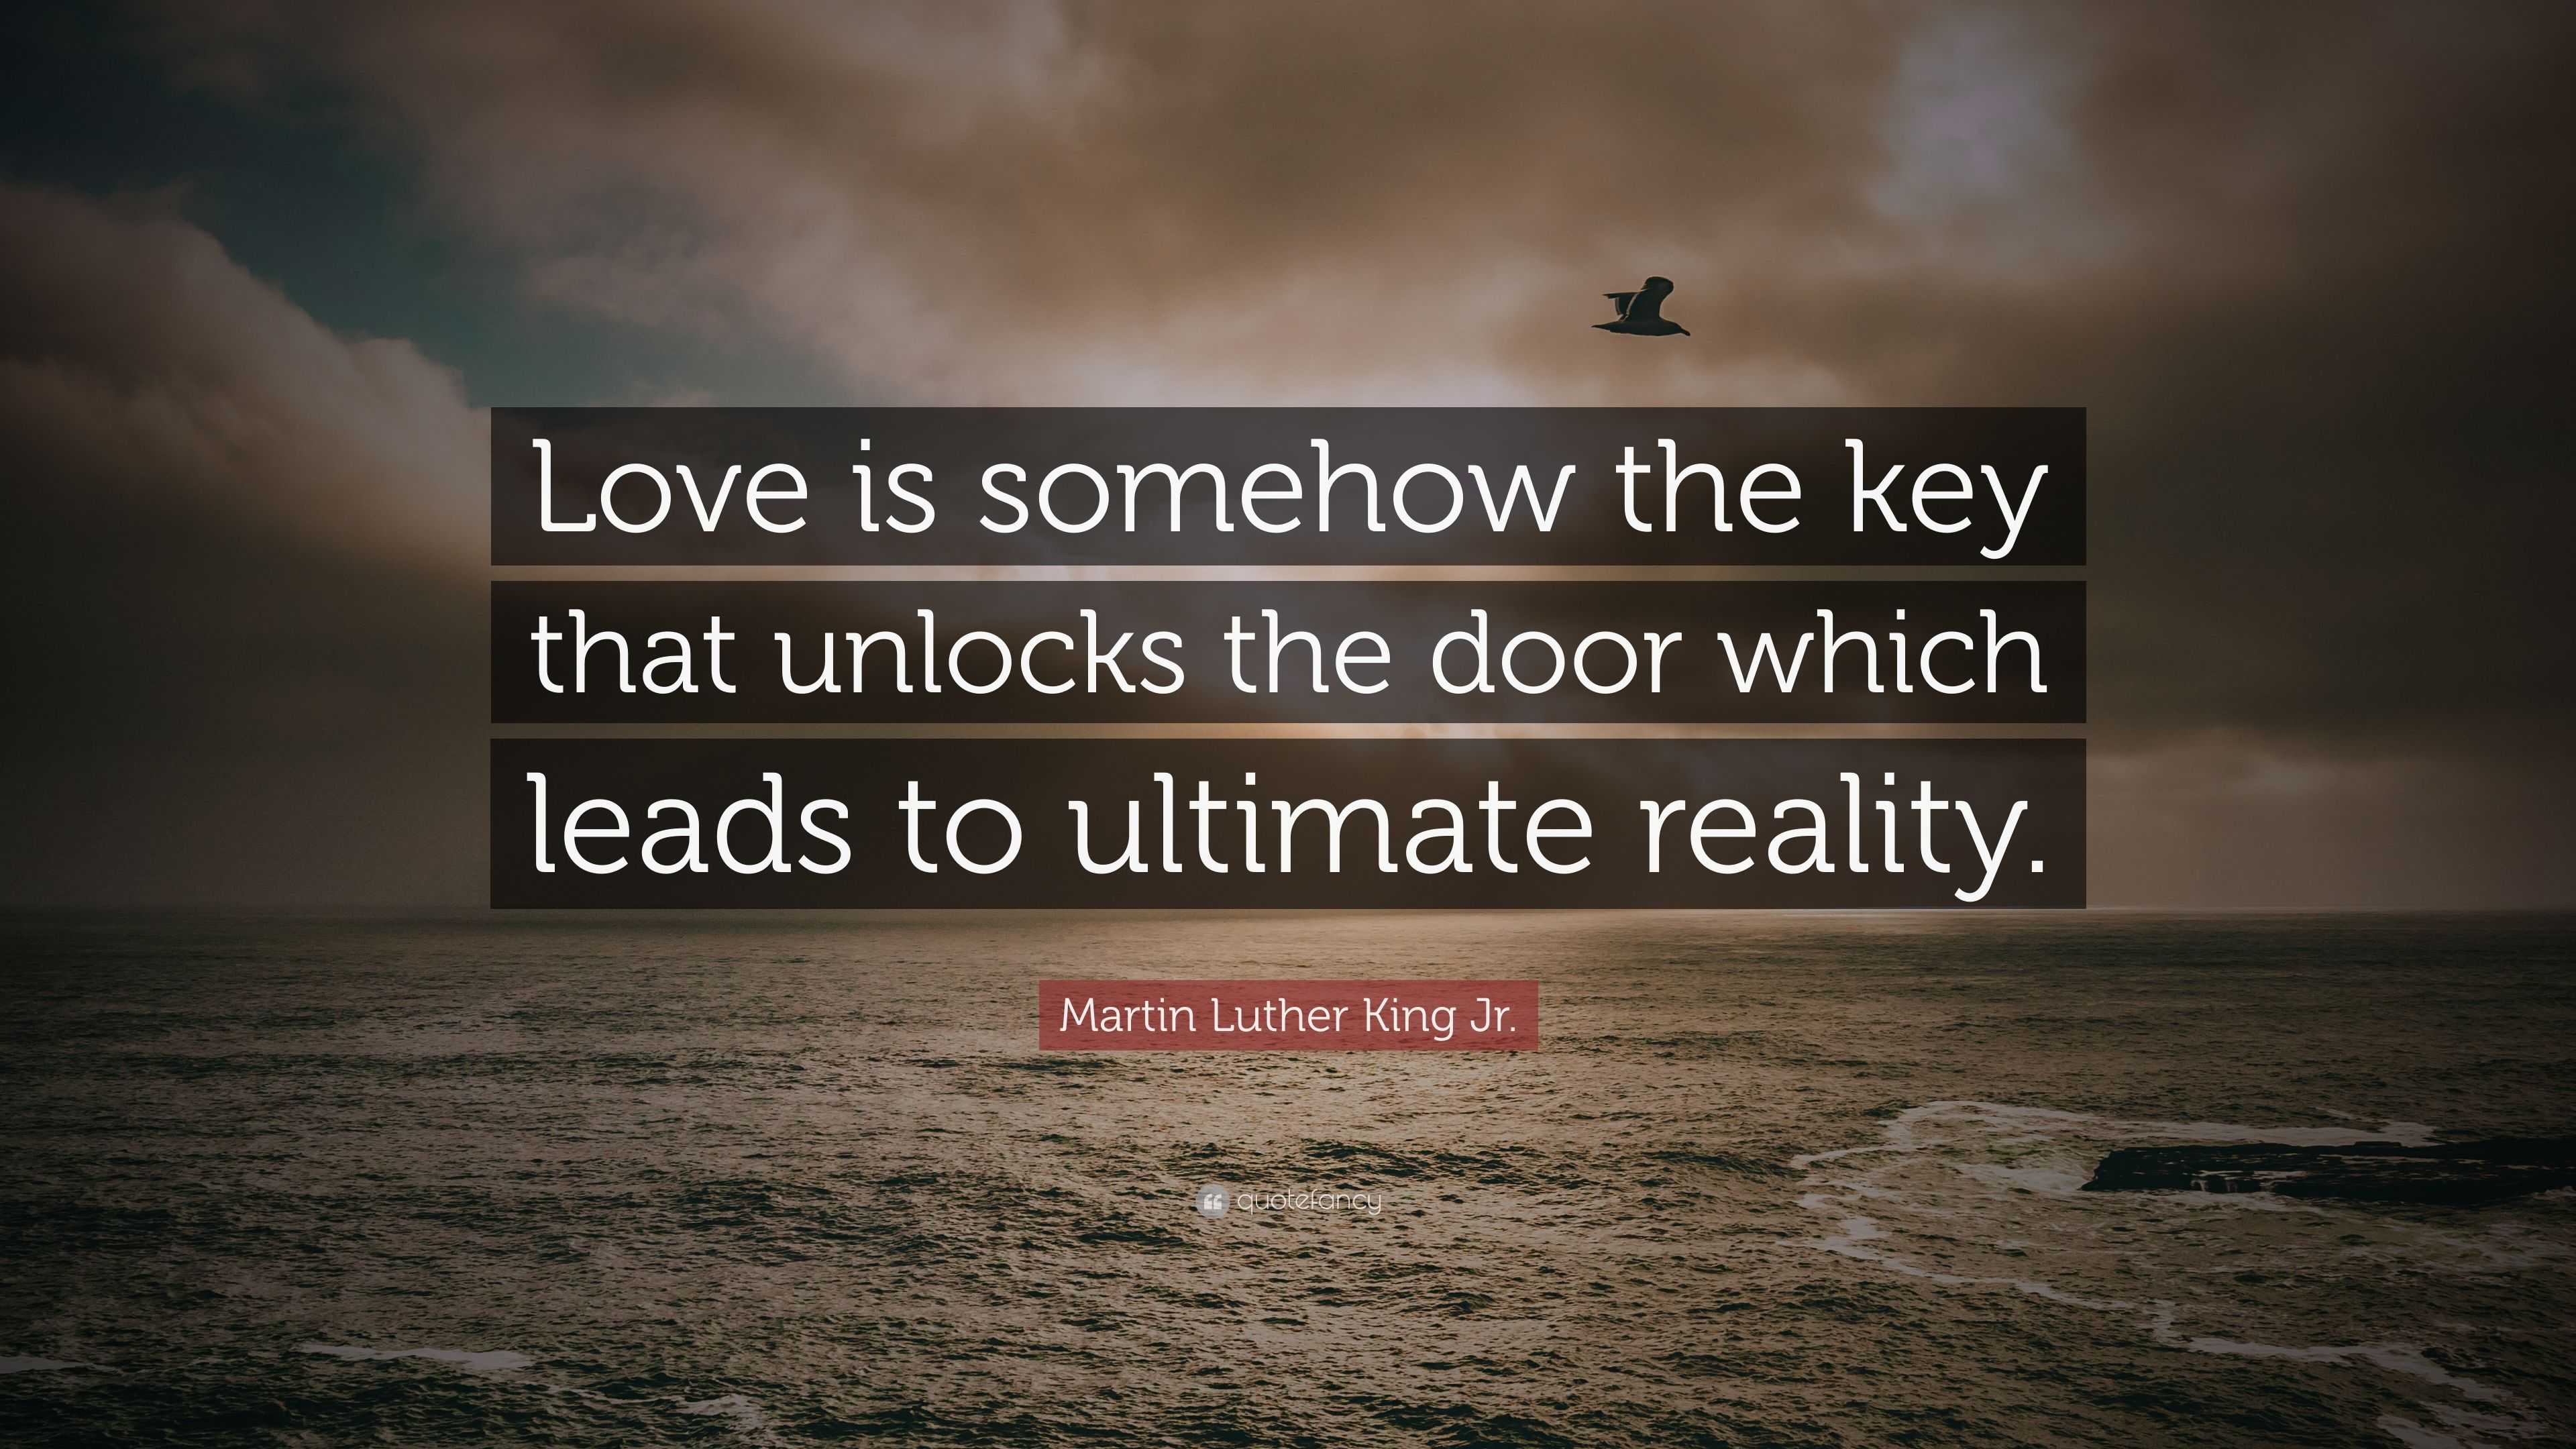 Martin Luther King Jr. Quote: “Love is somehow the key that unlocks the ...